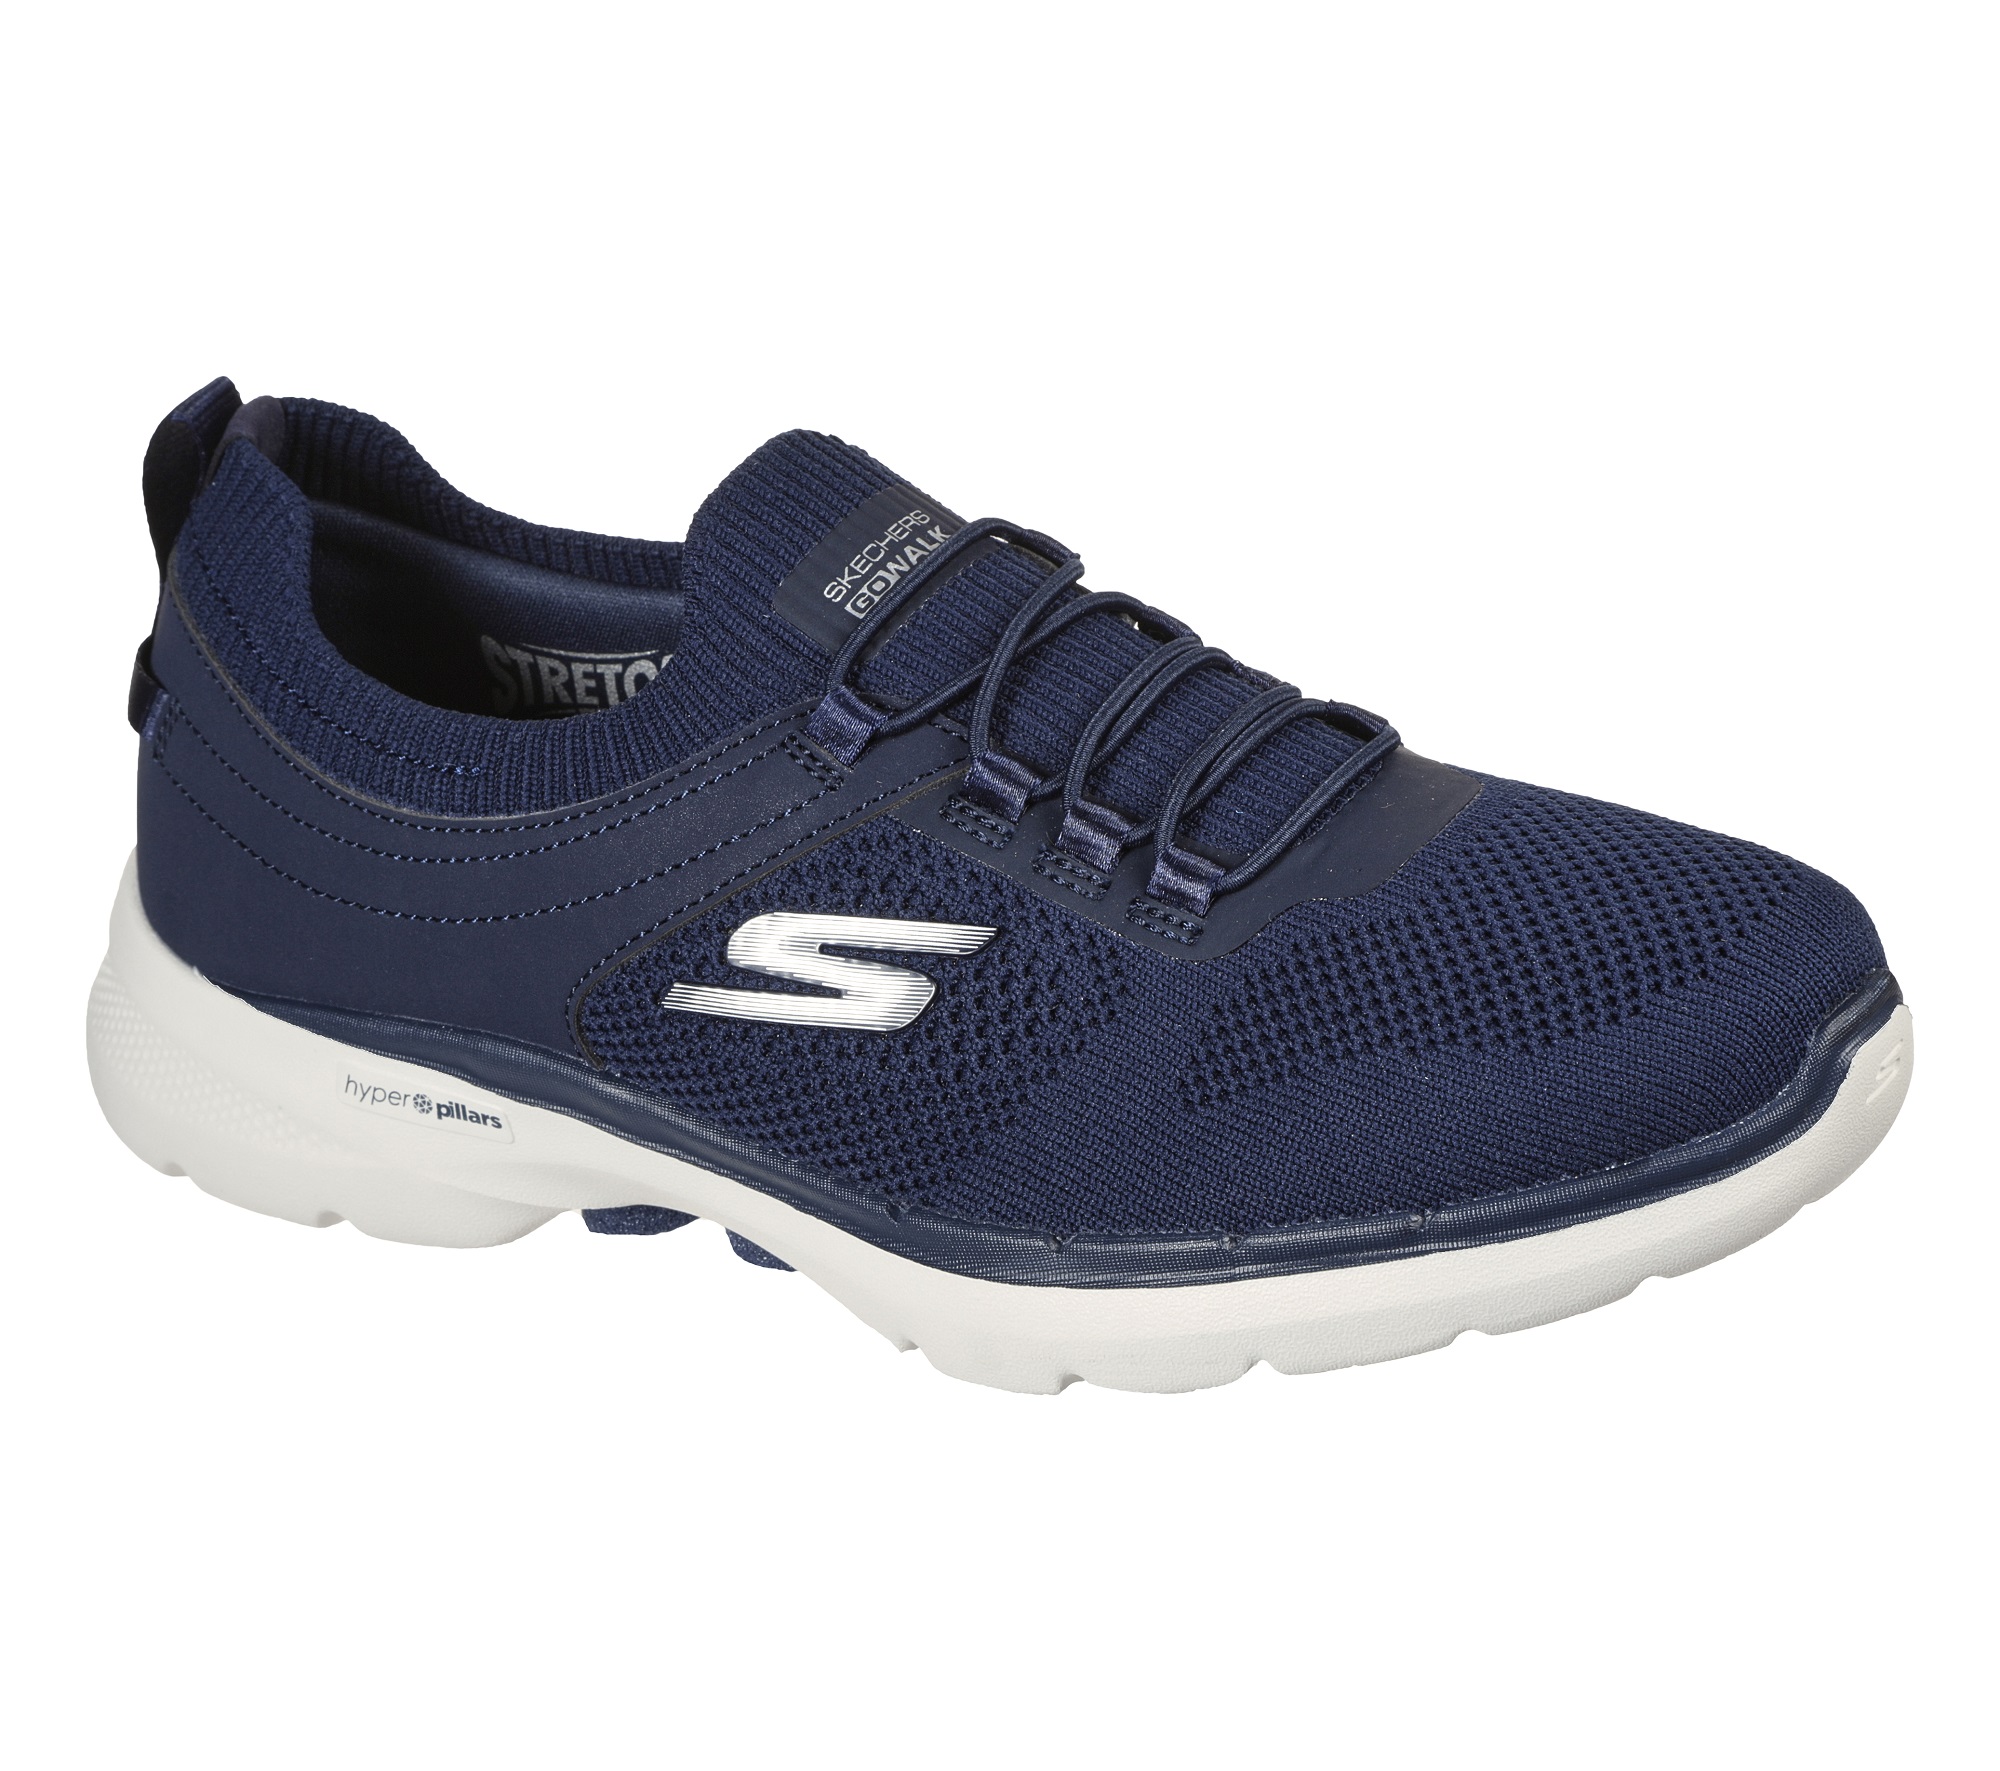 skechers-india-continues-championing-walking-with-the-launch-of-the-go-walk-6